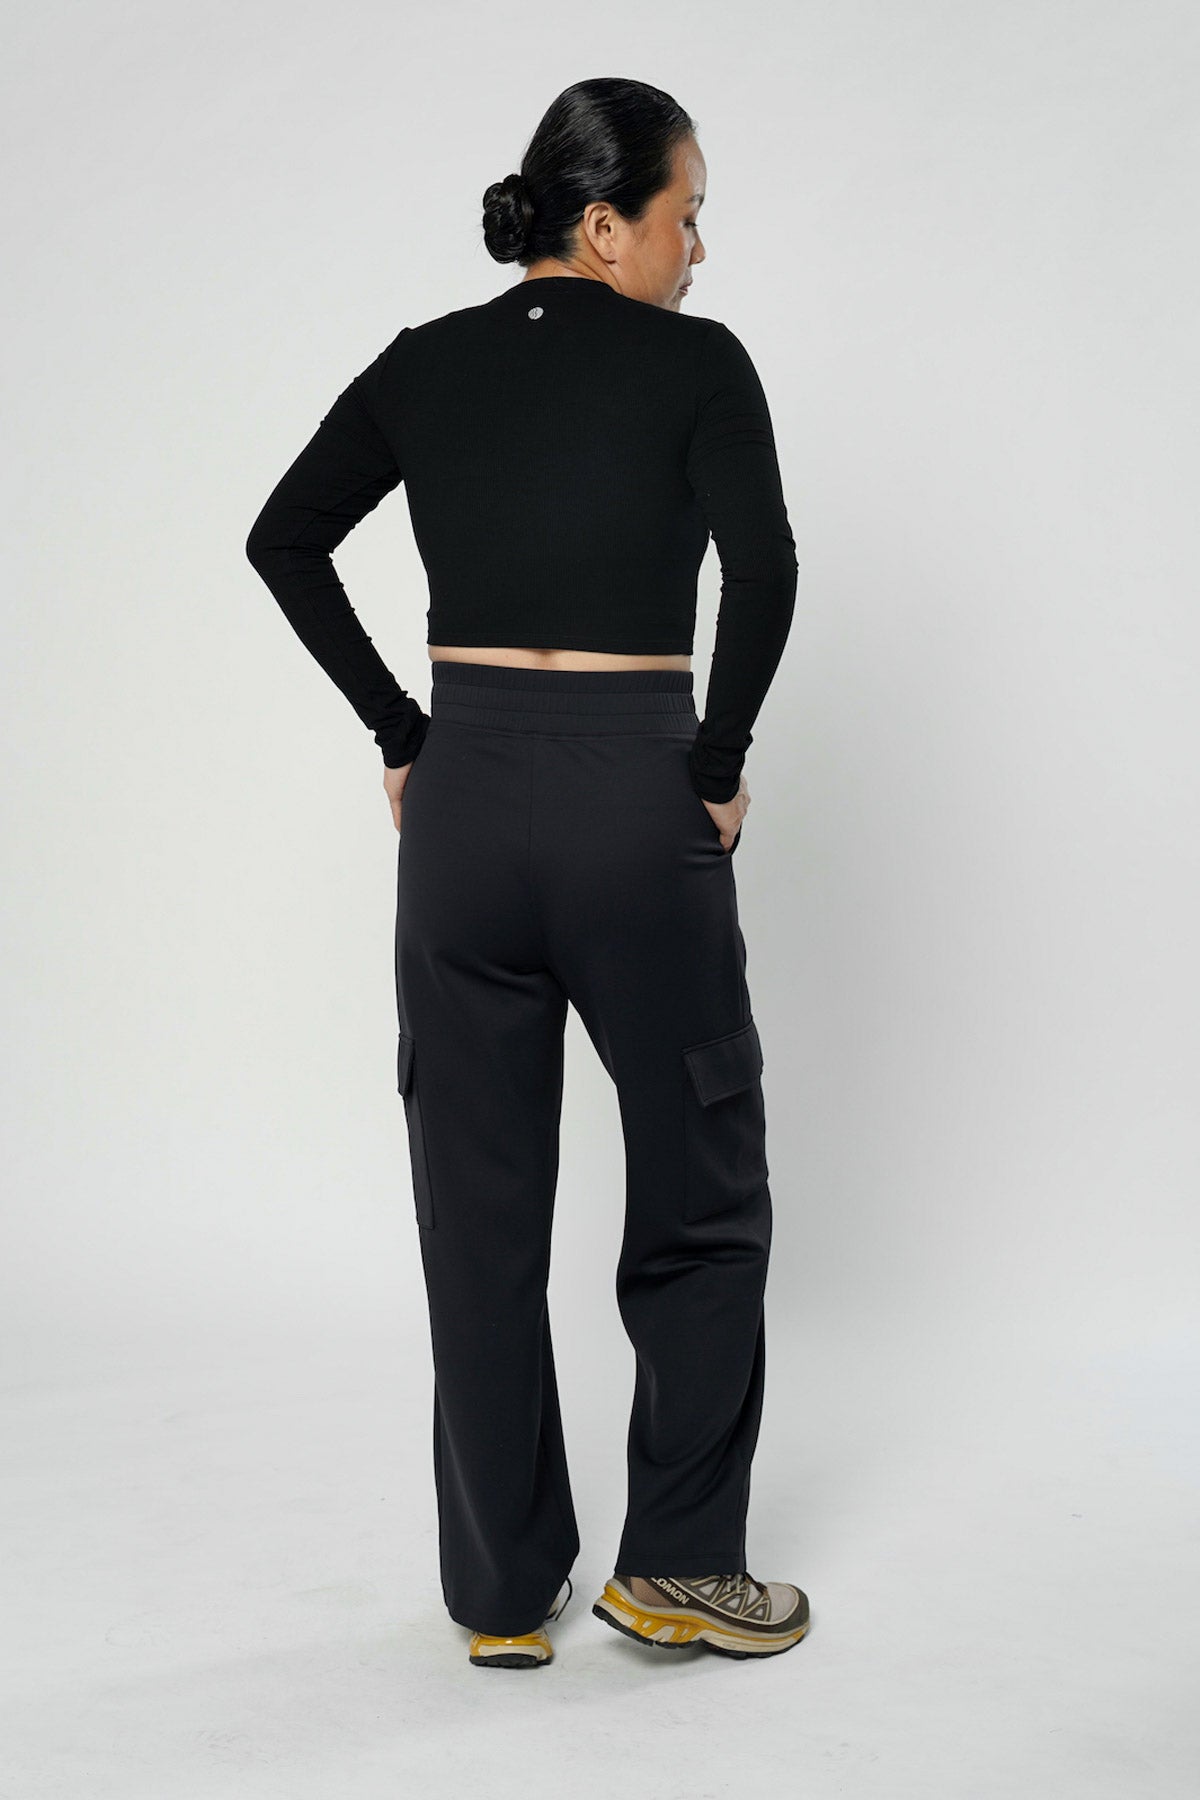 Warmth Long Sleeve Top In Black (3 XS LEFT)